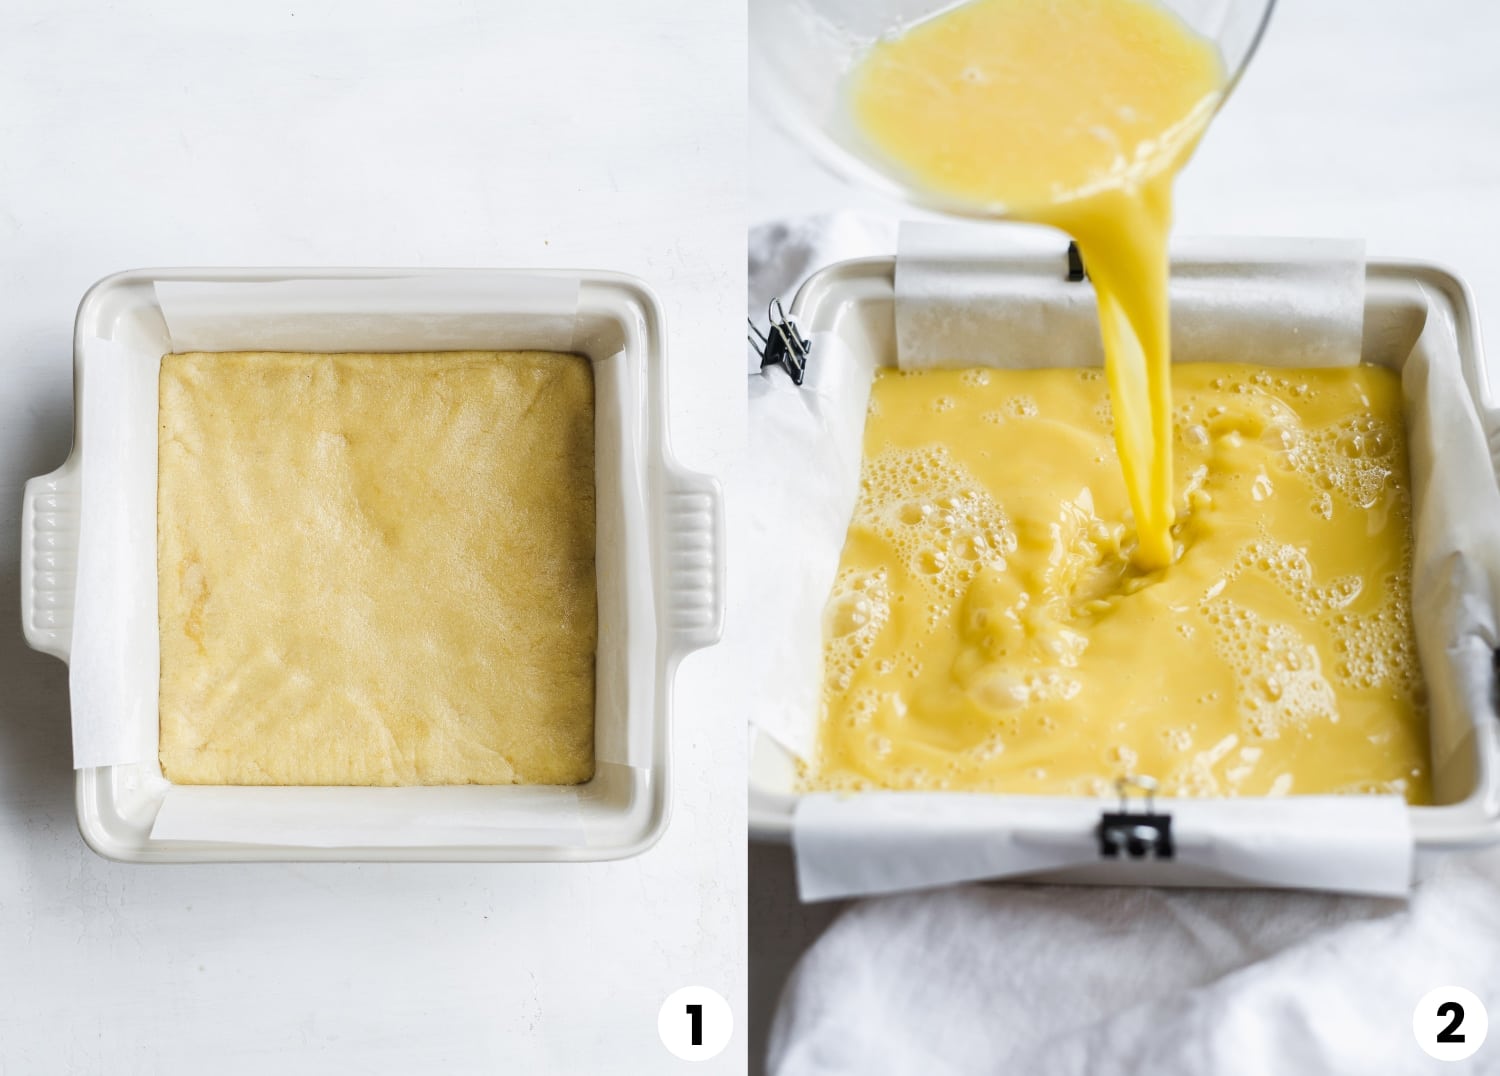 How to make the recipe, including baking the crust and pouring the lemon curd on top of the crust.